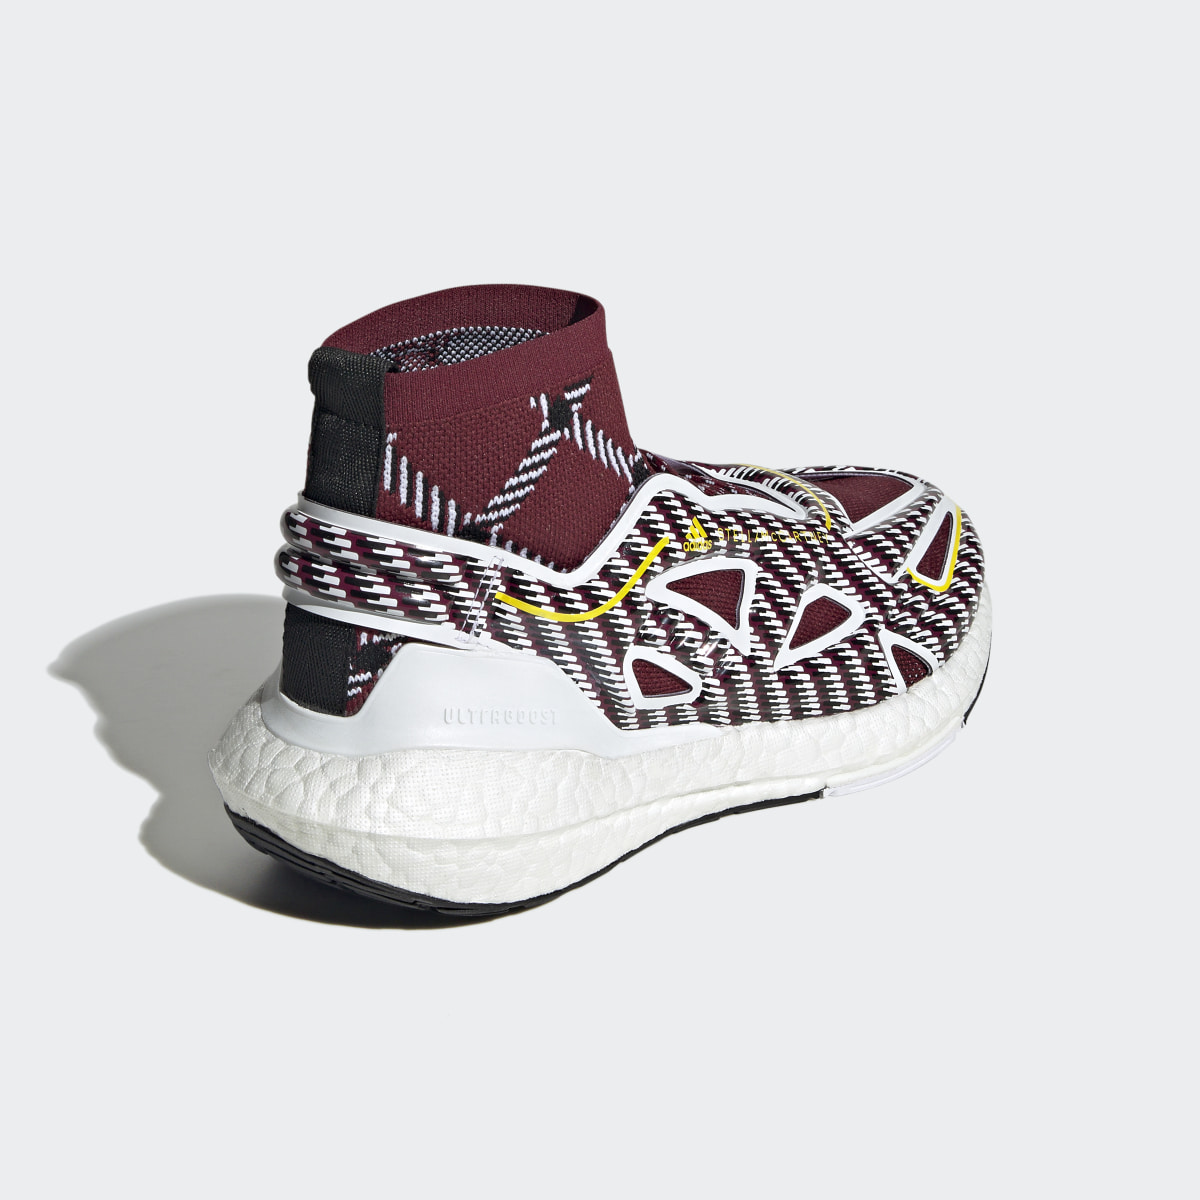 Adidas by Stella McCartney Ultraboost 22 Elevated Shoes. 6